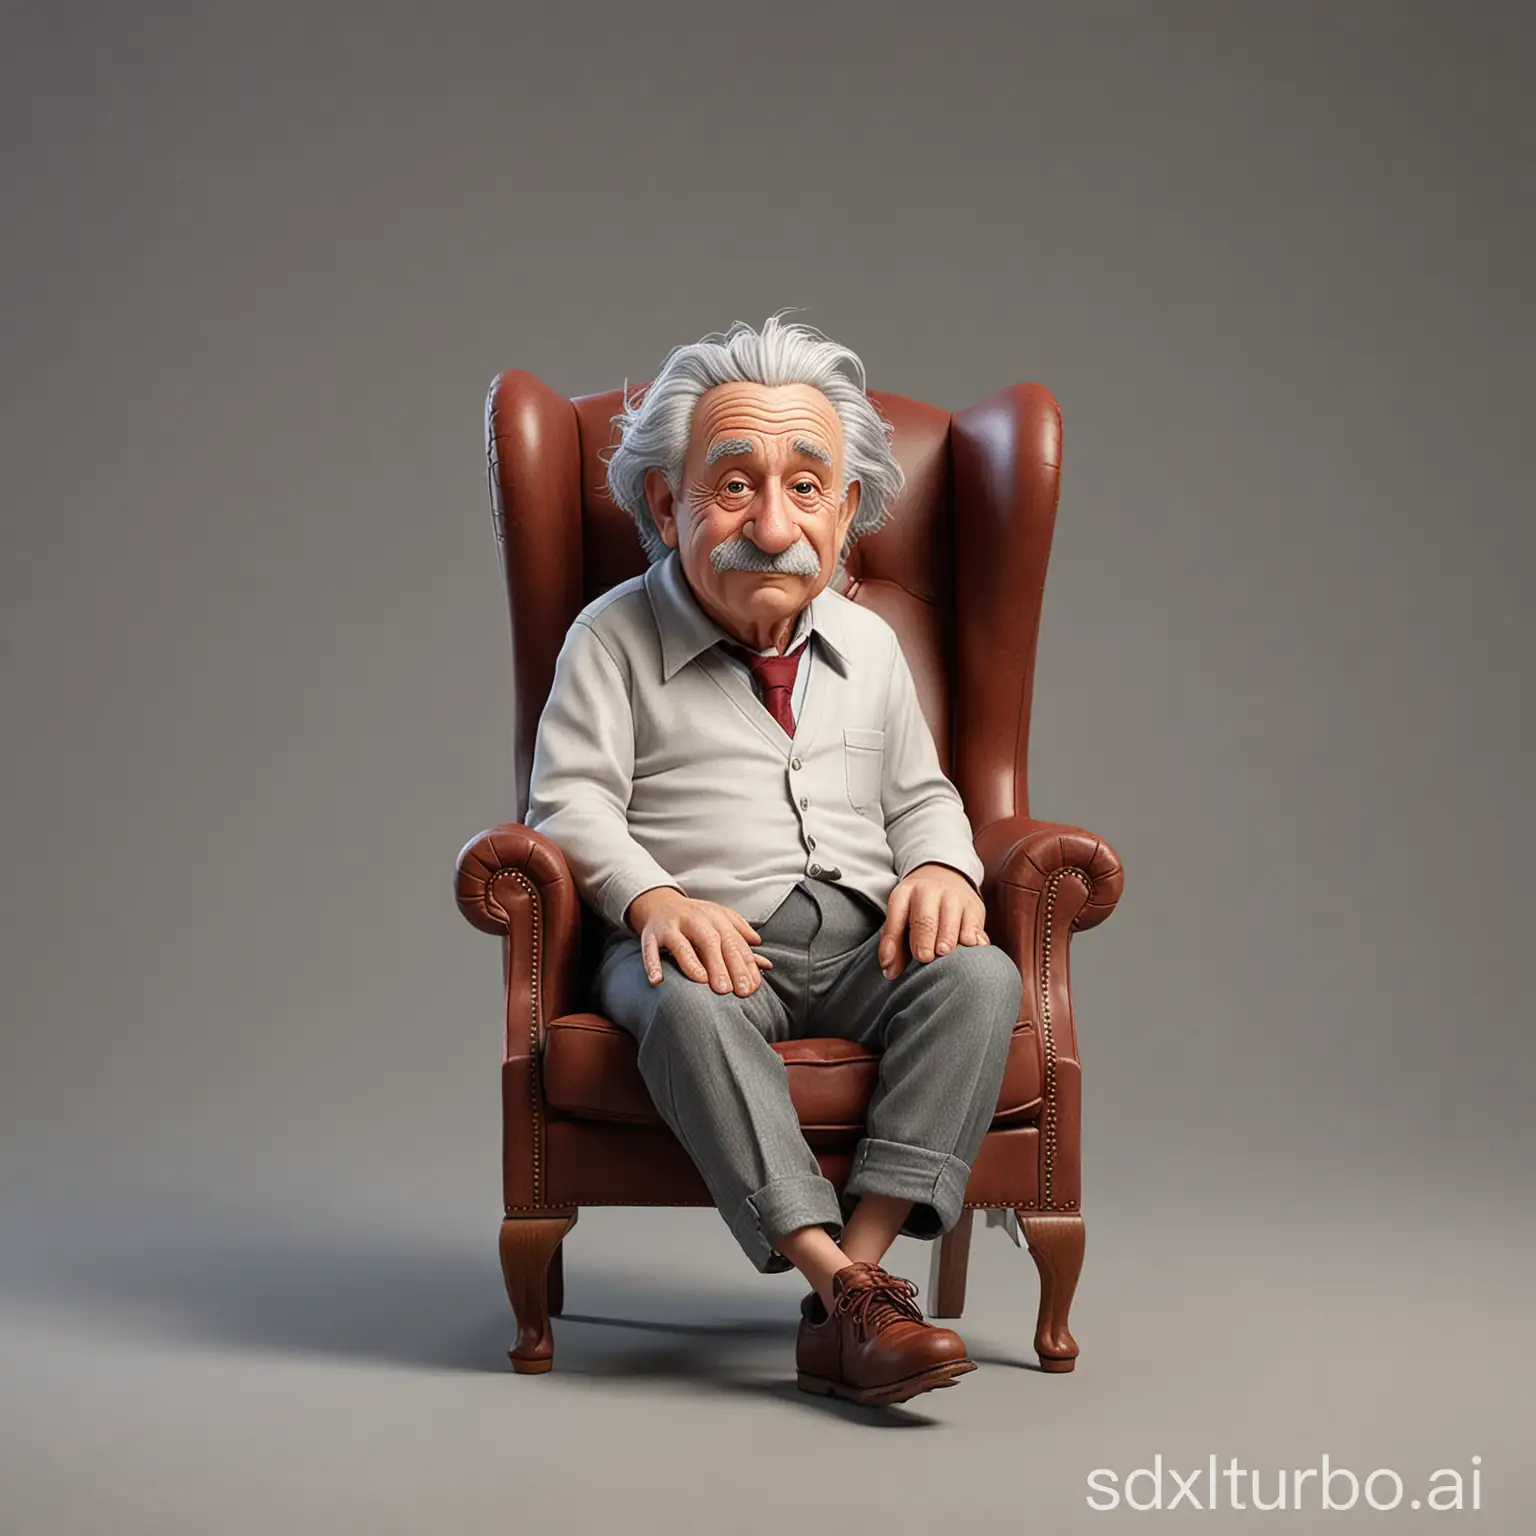 Albert-Einstein-Caricature-Portrait-in-Pixar-Style-Seated-in-Red-Wingback-Chair